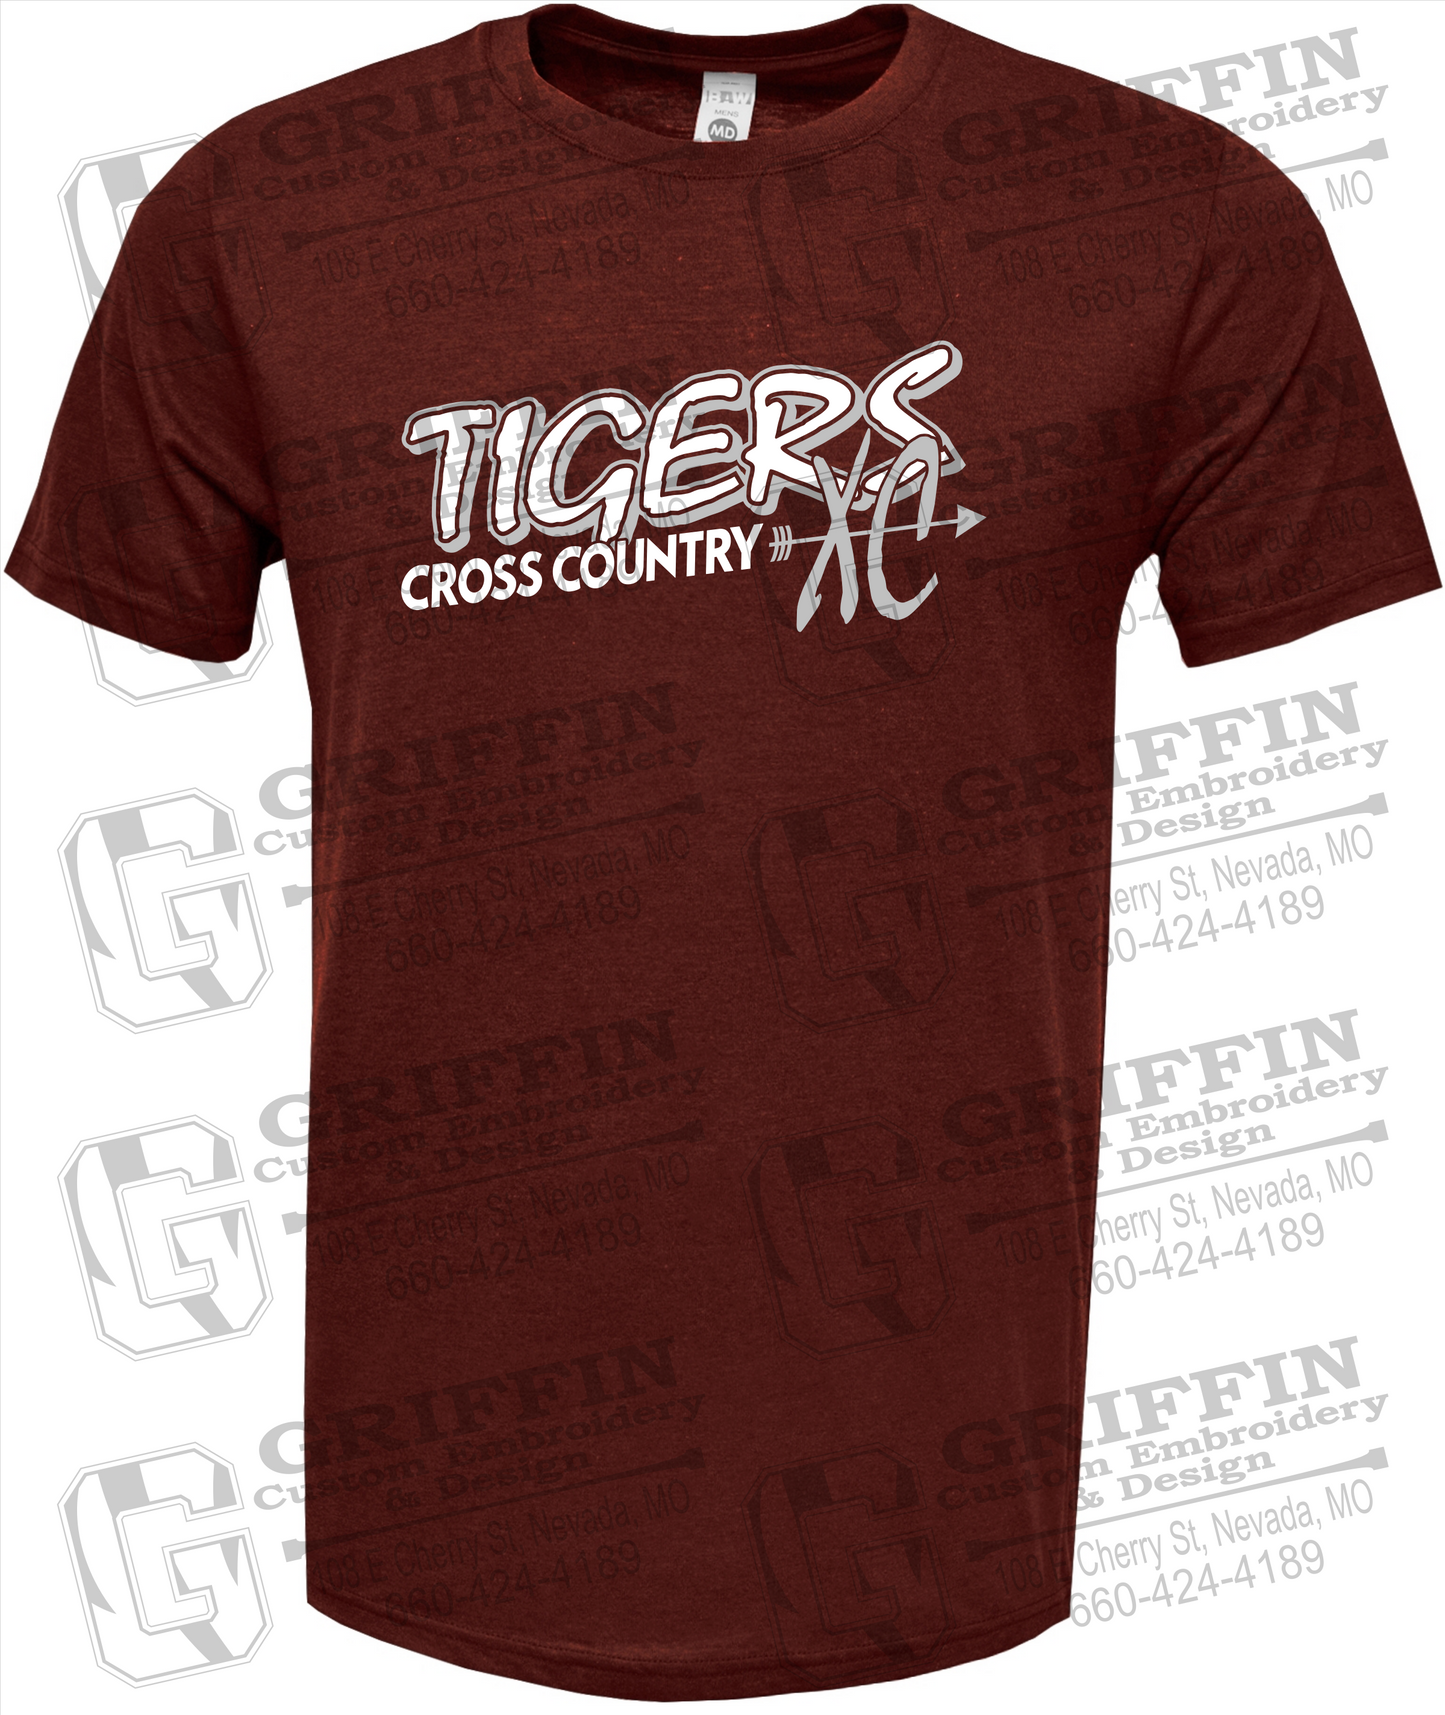 Nevada Tigers 23-S Short Sleeve T-Shirt - Cross Country